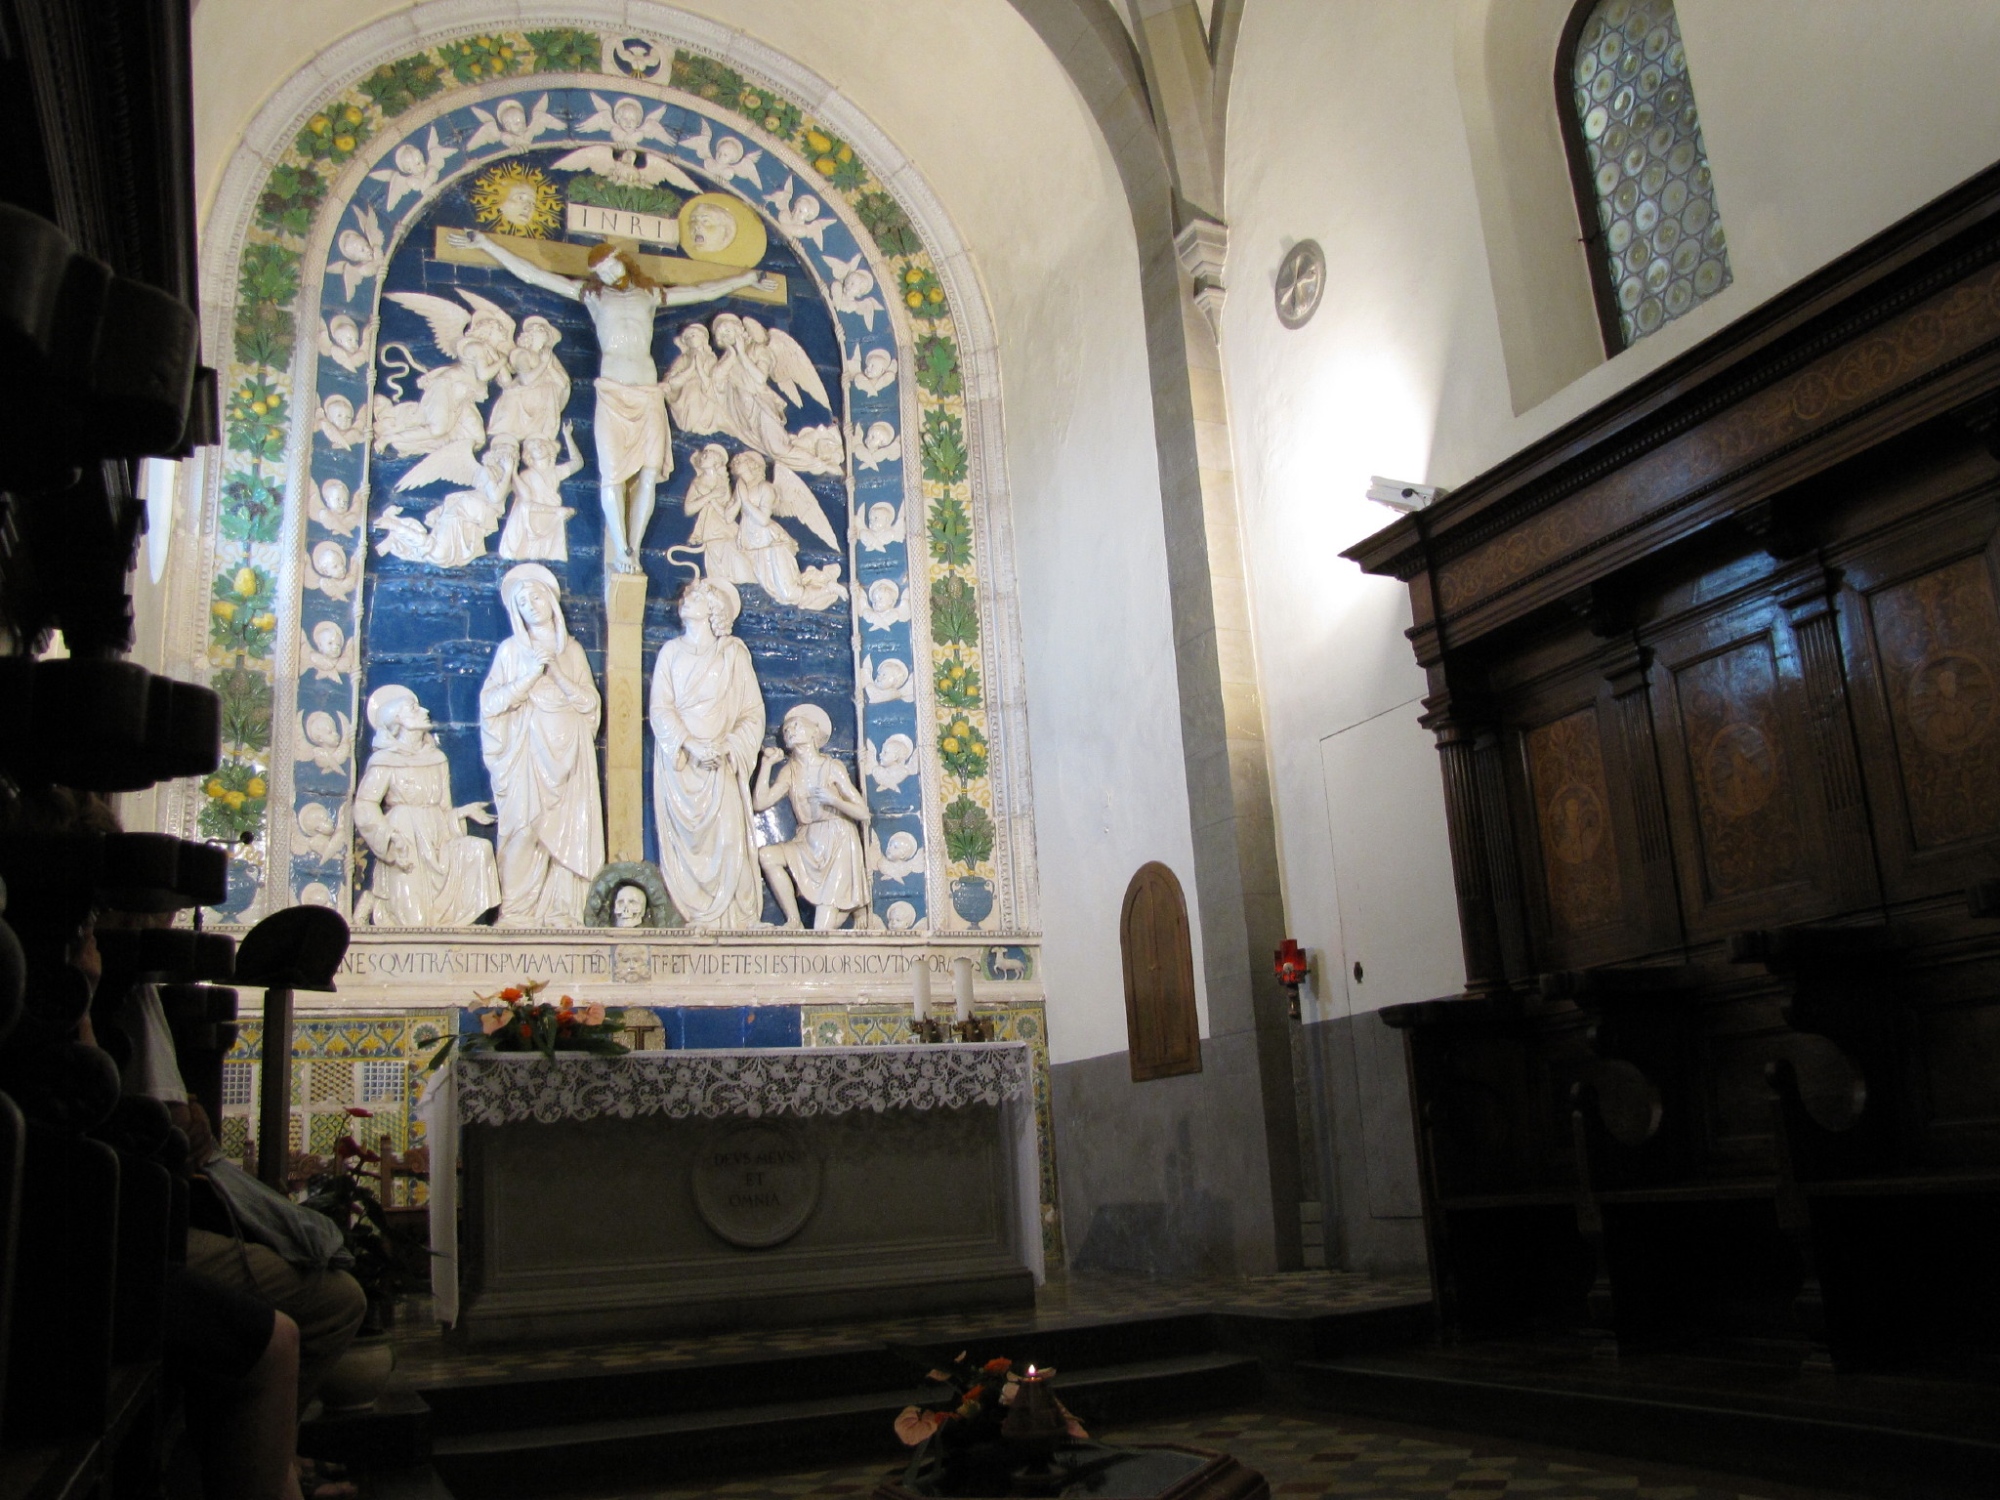 Work by the Della Robbia family Sanctuary of the Verna